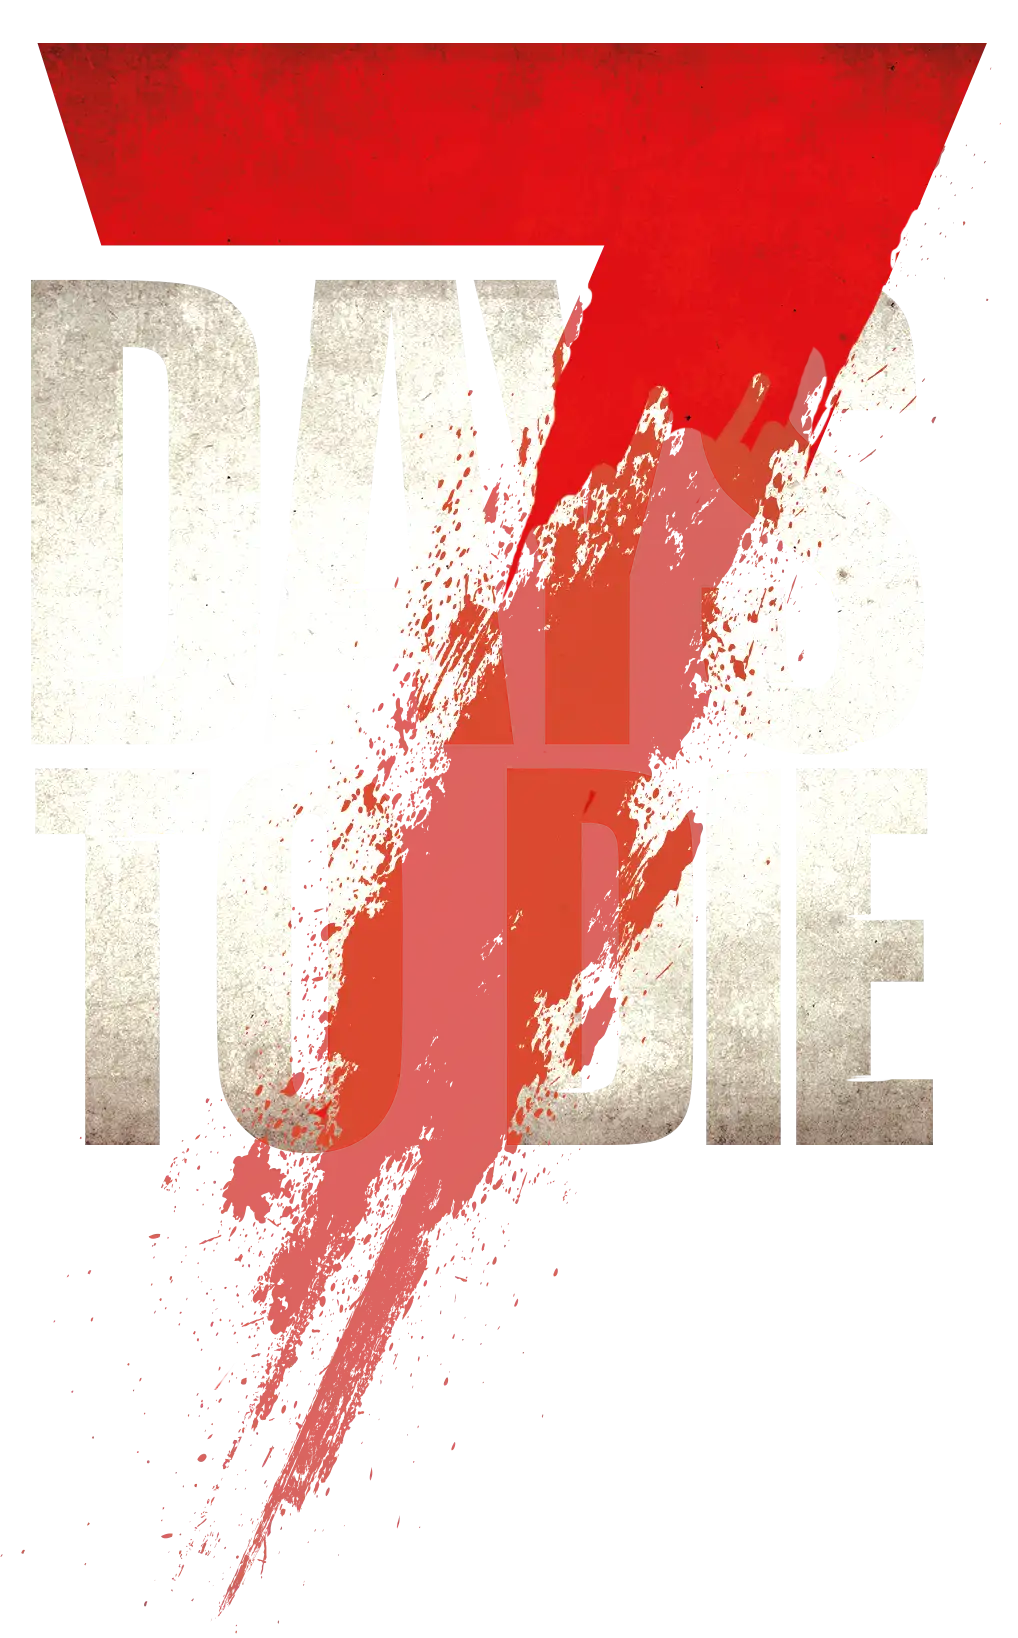 7 Days to Die Cover